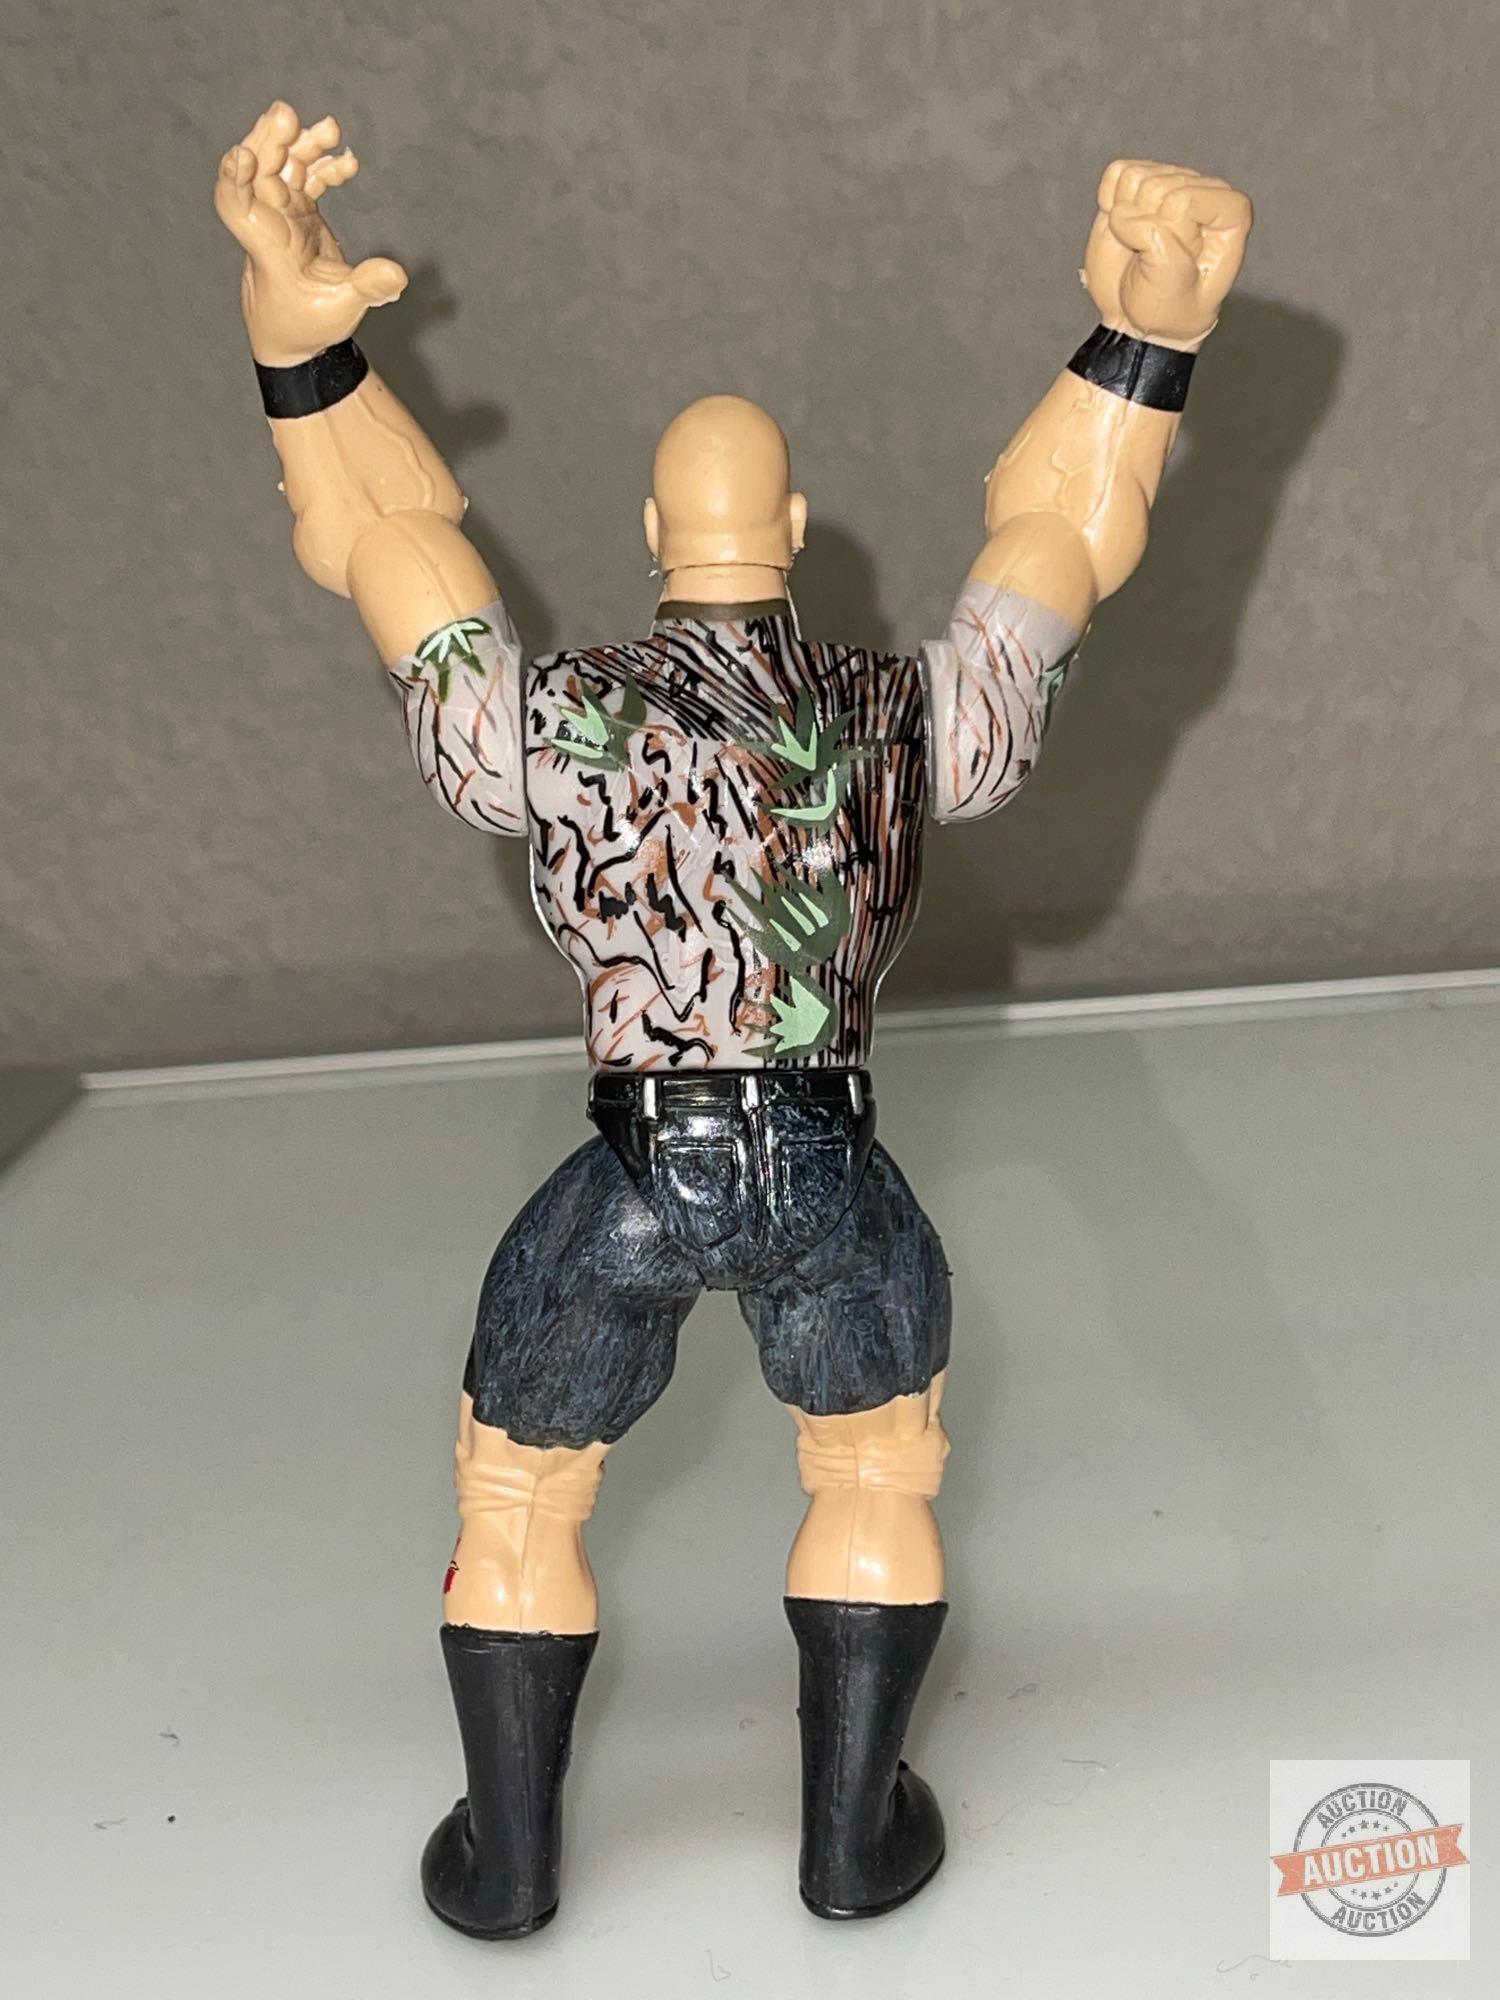 Toys - WWF 4 Wrestling Auction Figures, 1997, 6", 3 stands, 4x's the money